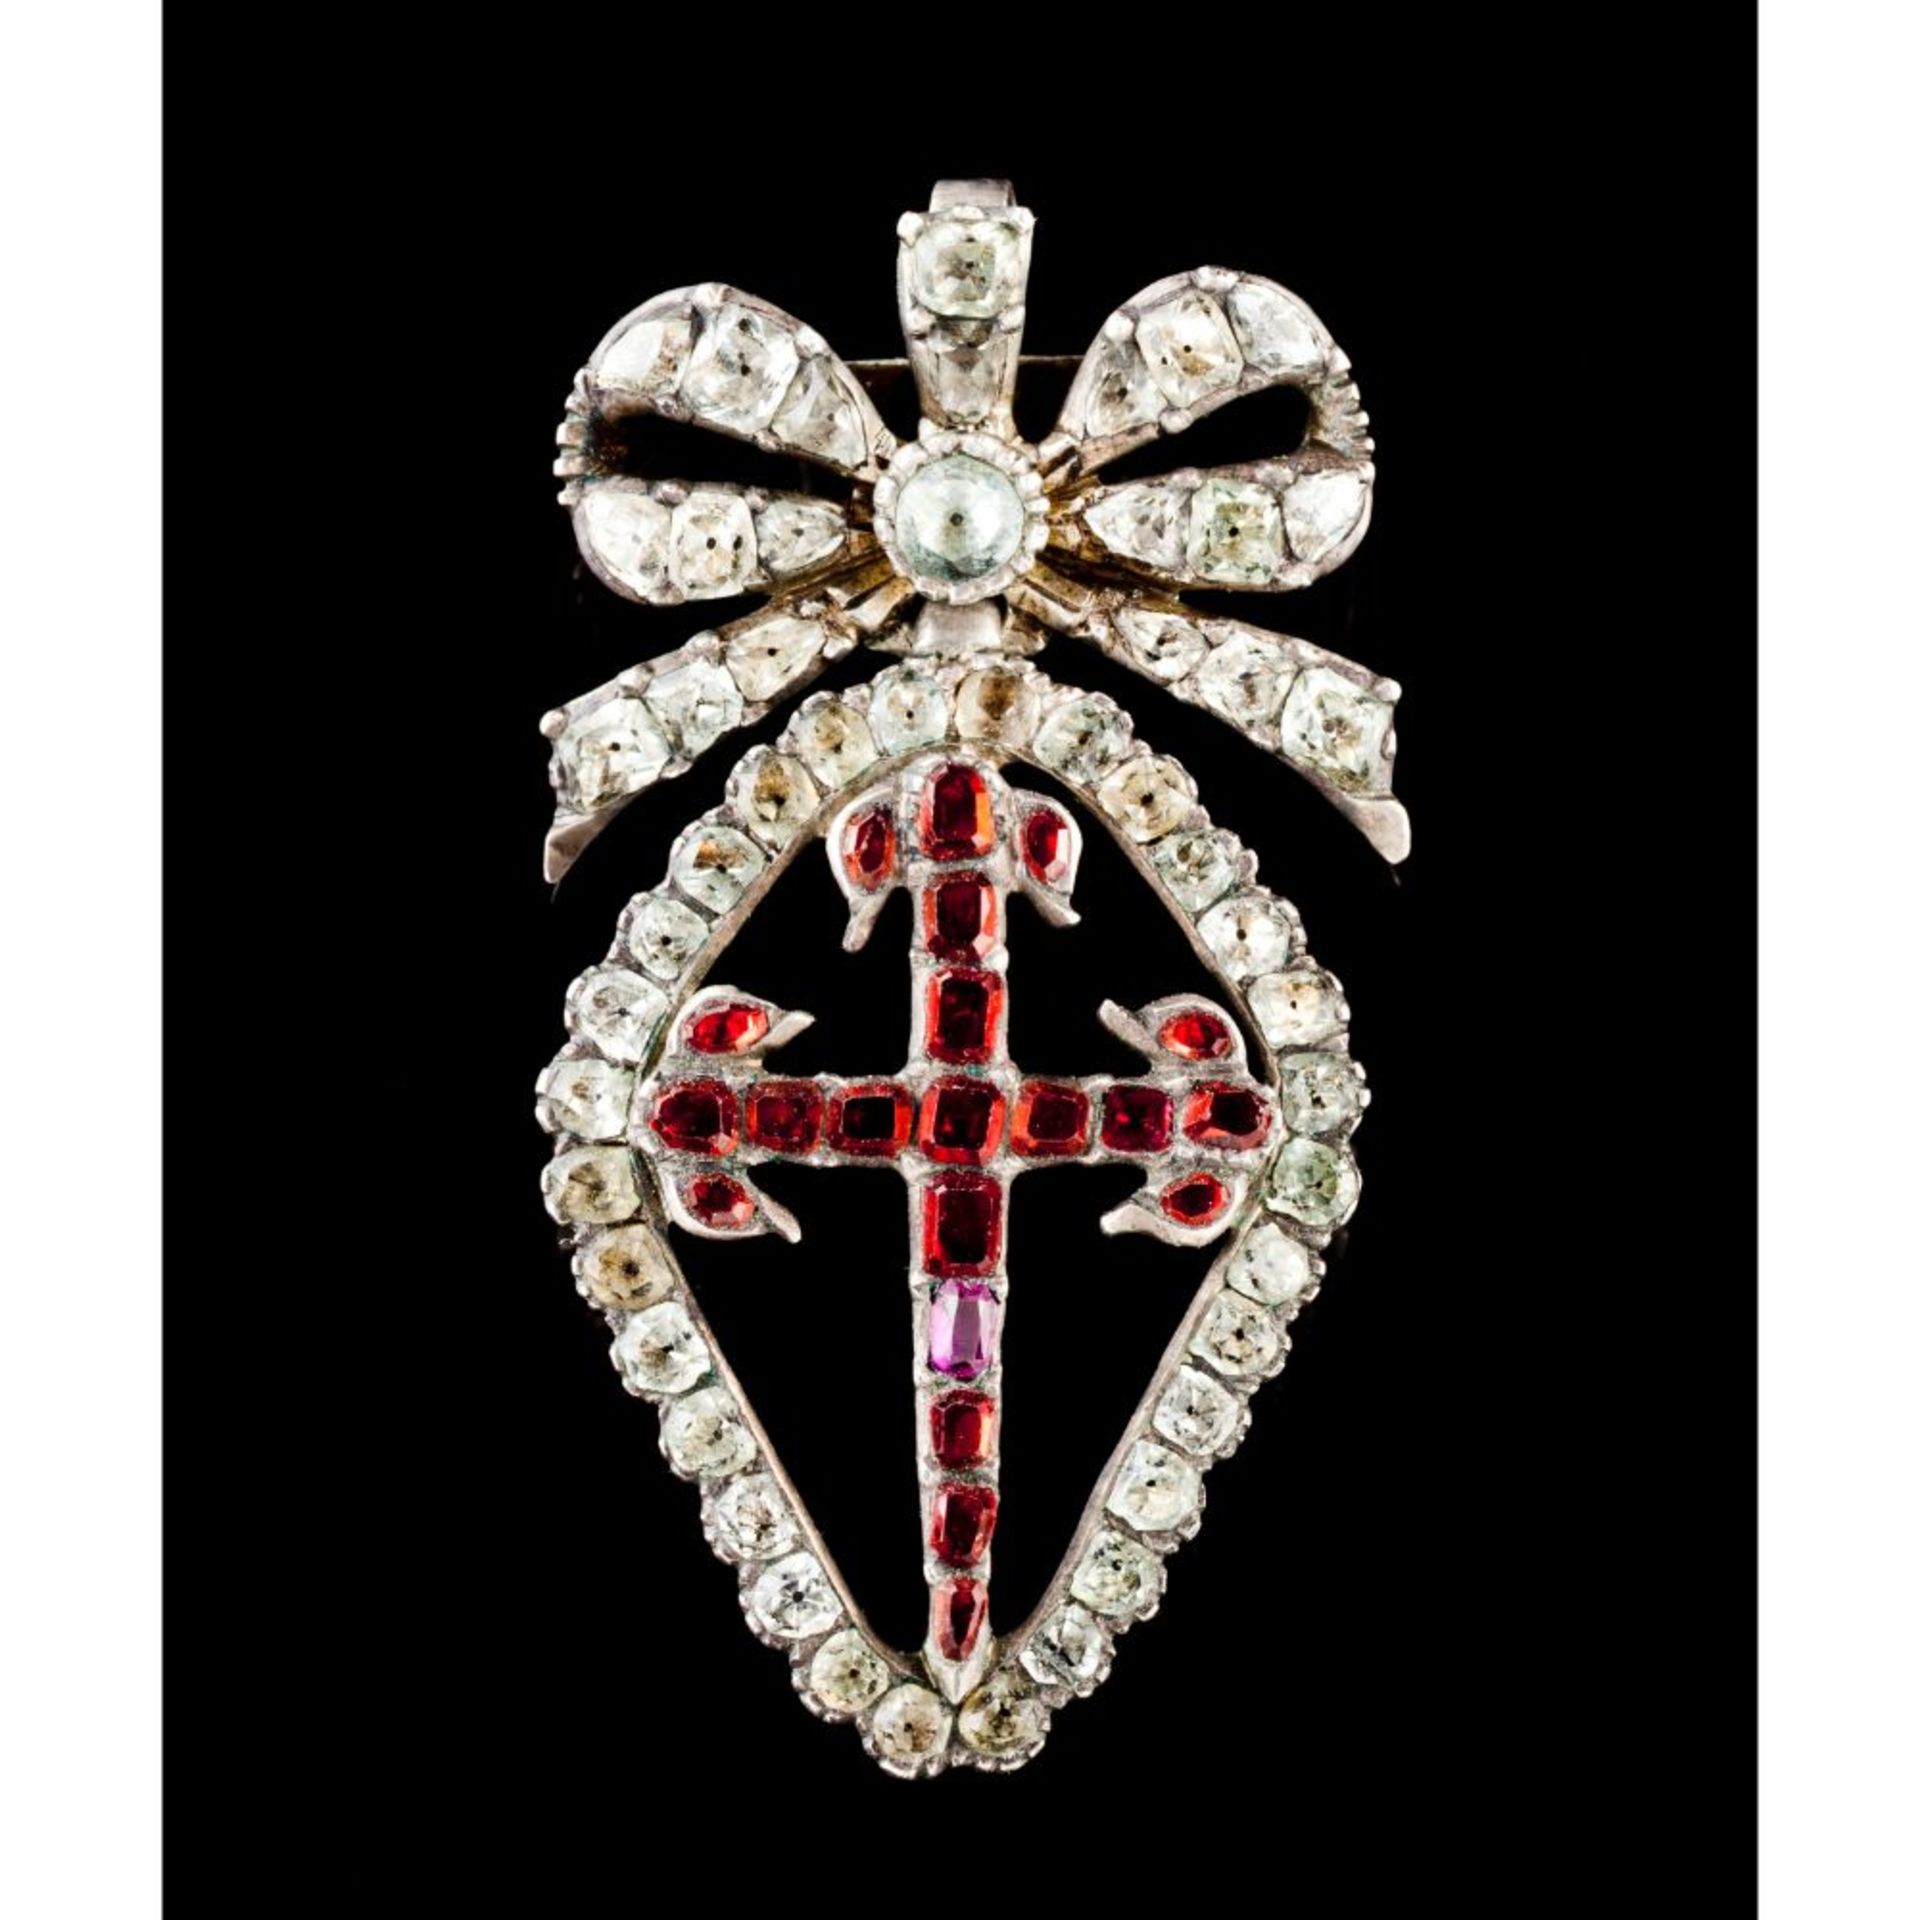 Insignia pendant of the Military Order of Saint James of the Sword